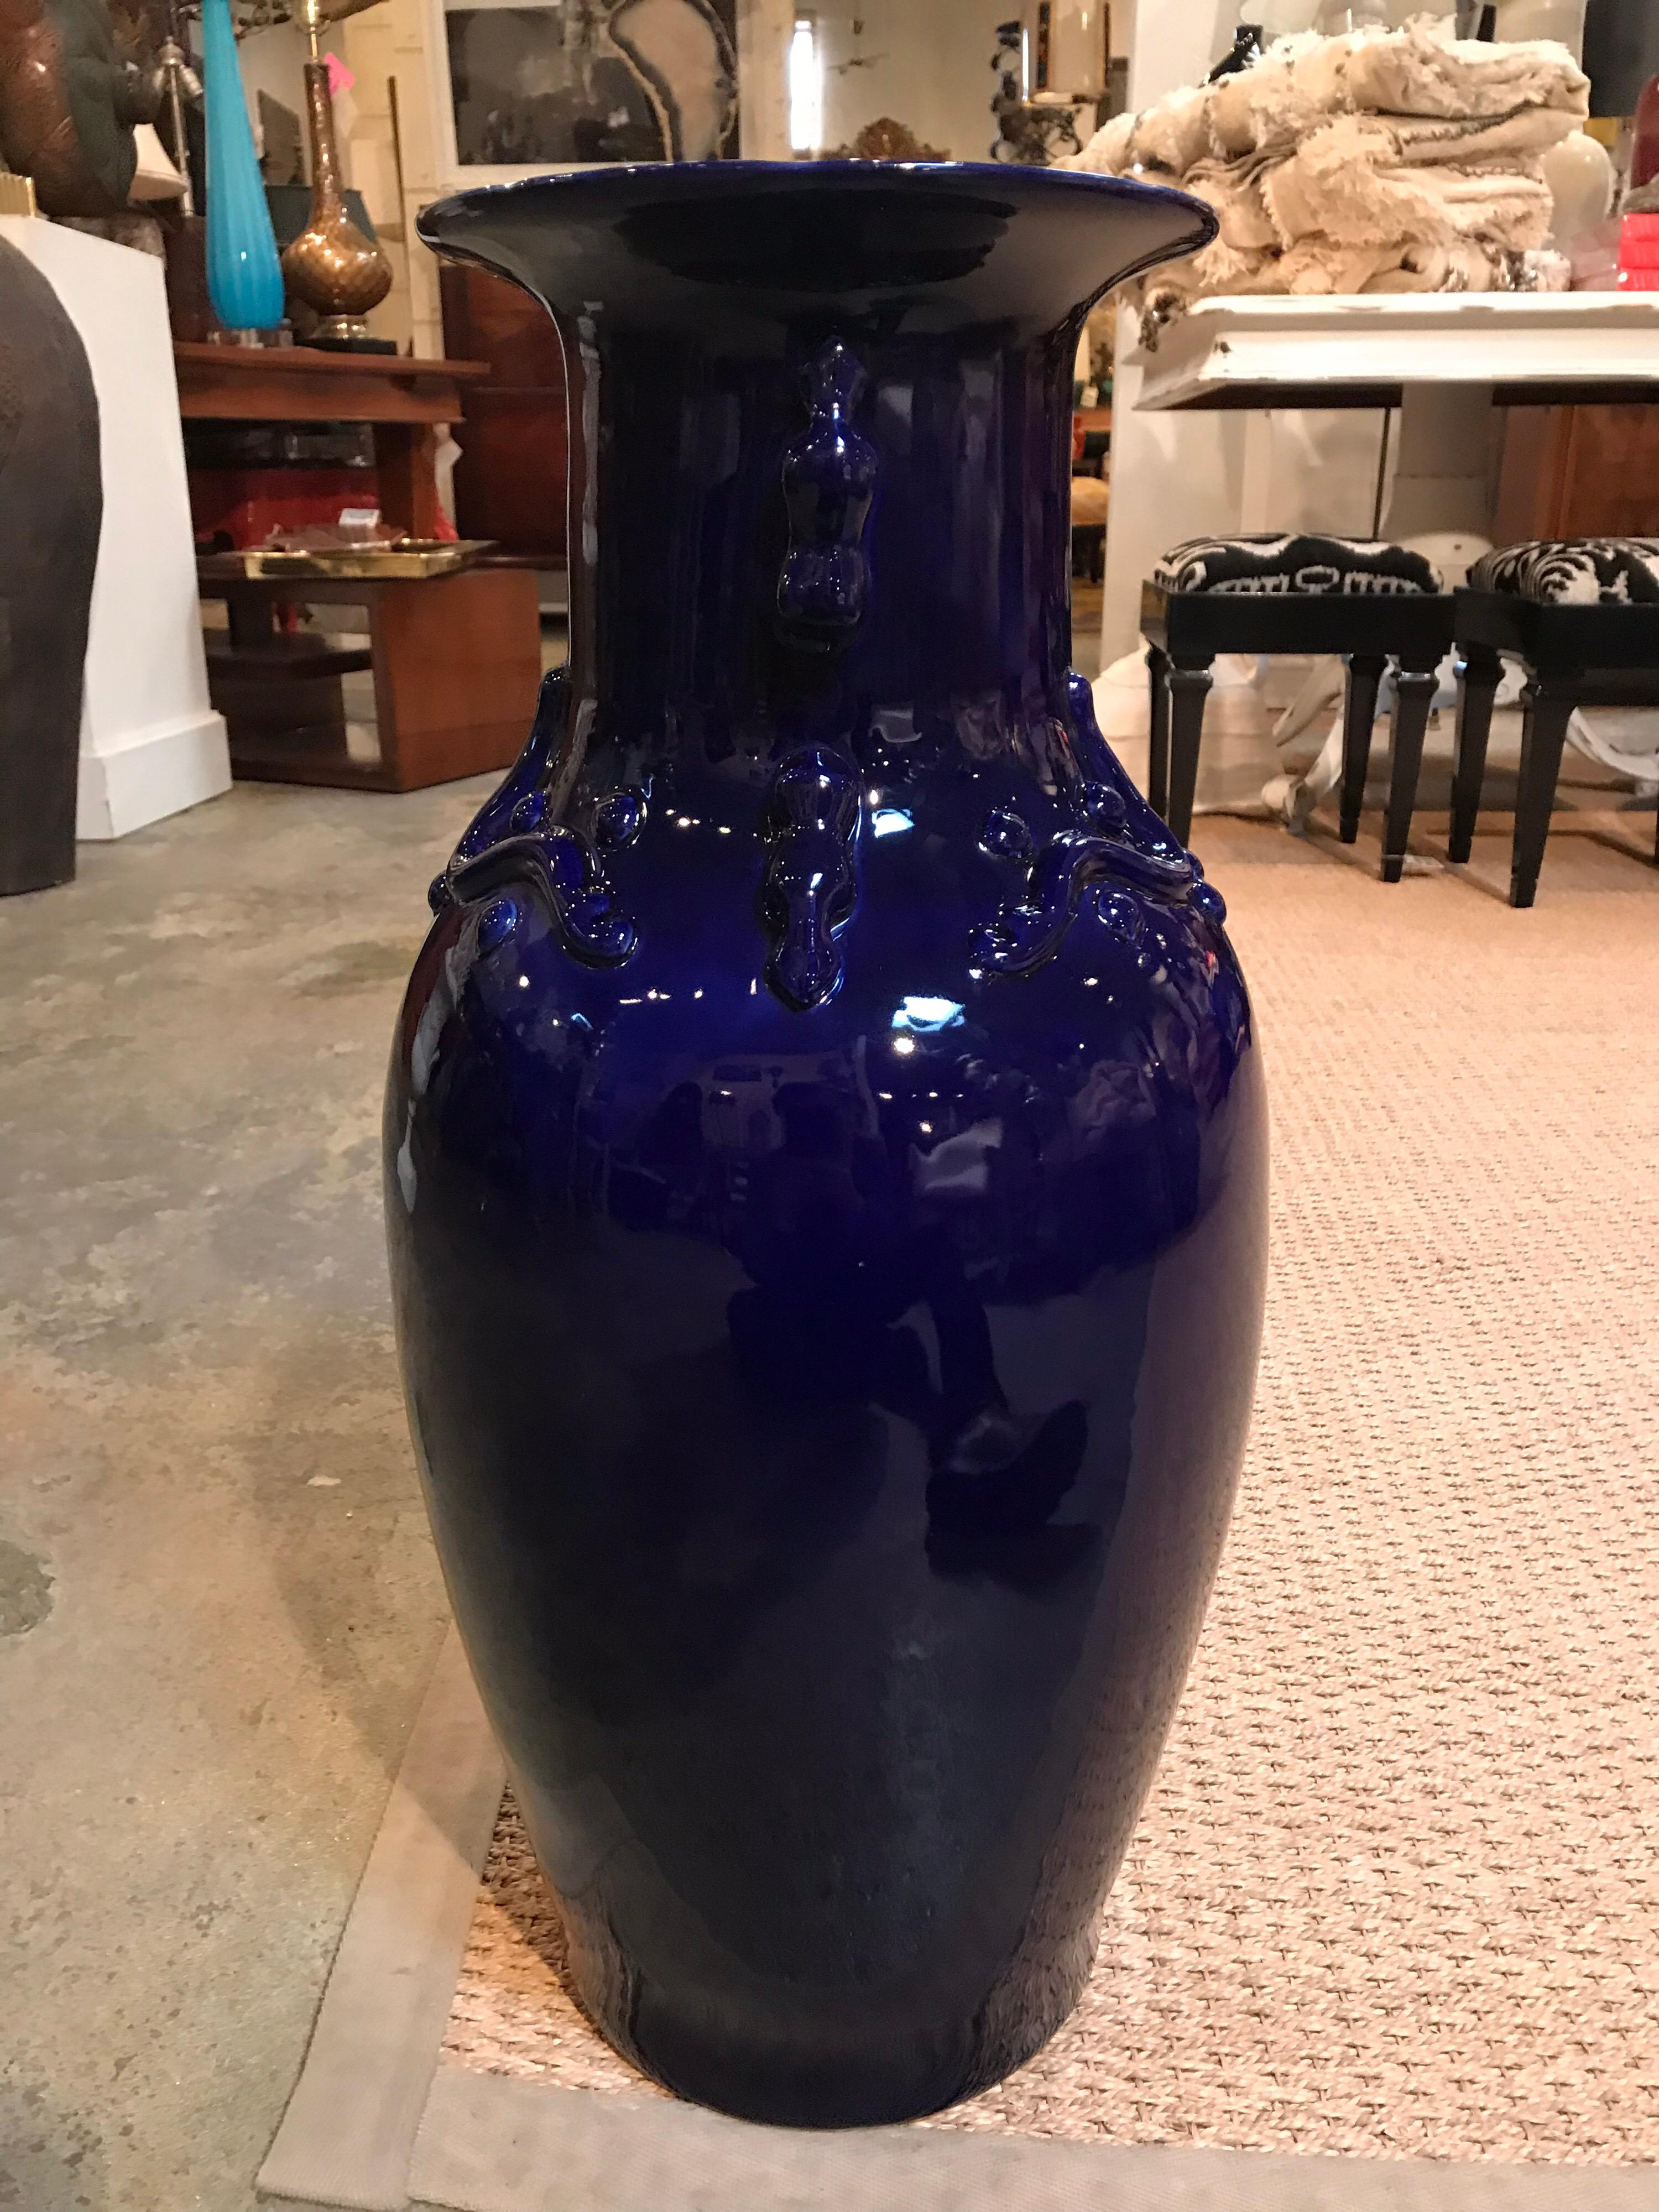 This handmade vase was made in the mid-20th century in a glazed cobalt blue ceramic with decorative raised shapes around the base of the neck. The item is thin and hollow.